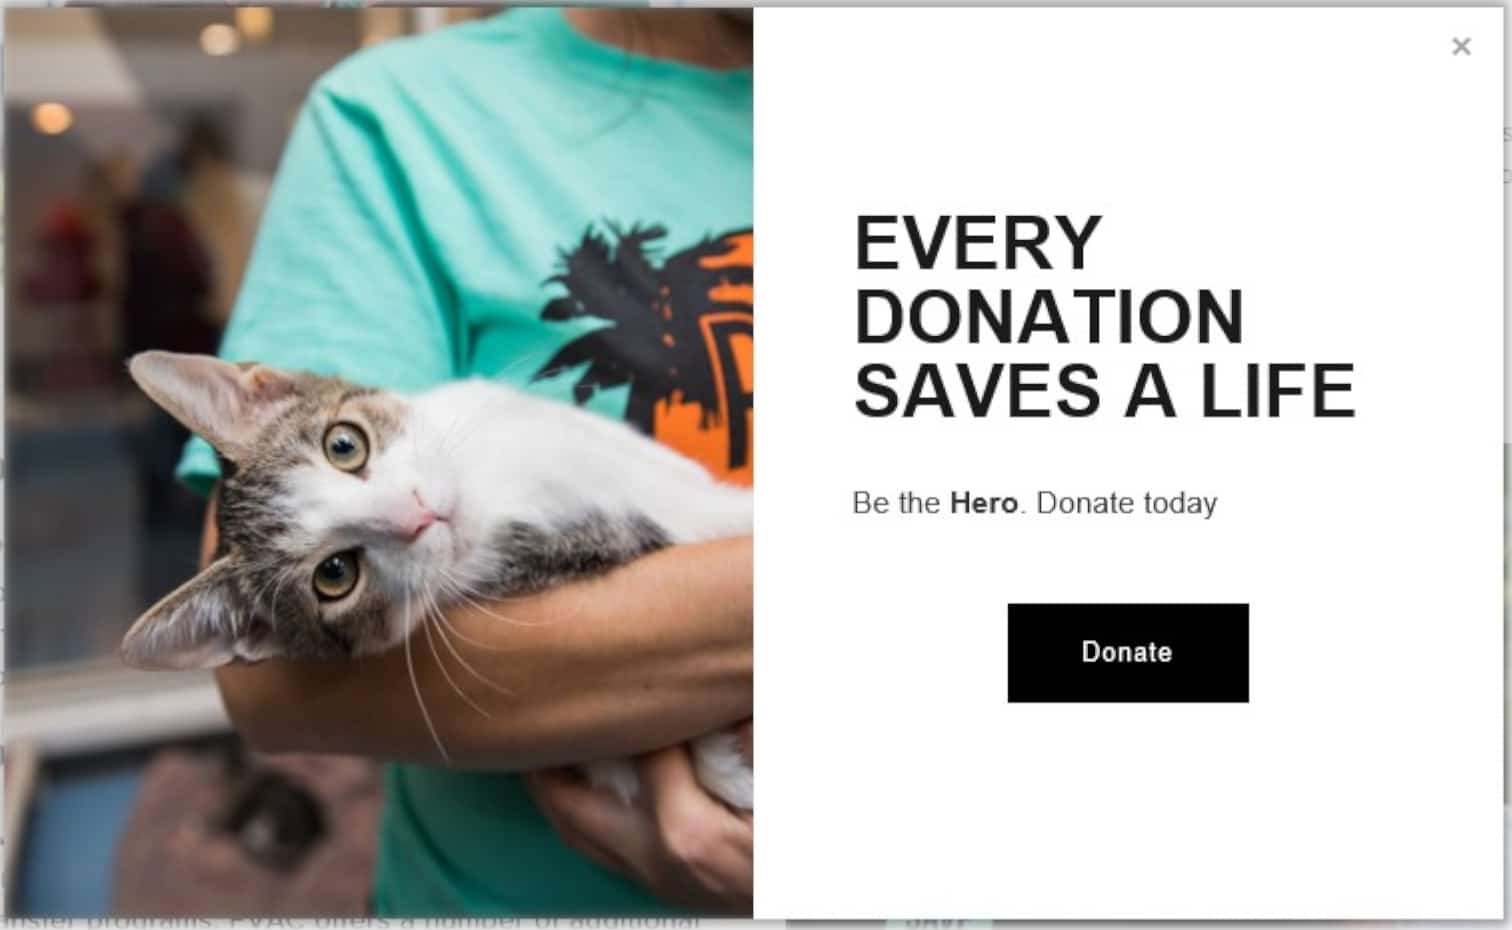 The Palm Valley Animal Center uses an exit intent pop-up to request donations to their organization. They include an image that should appeal to the reader’s emotions as well.